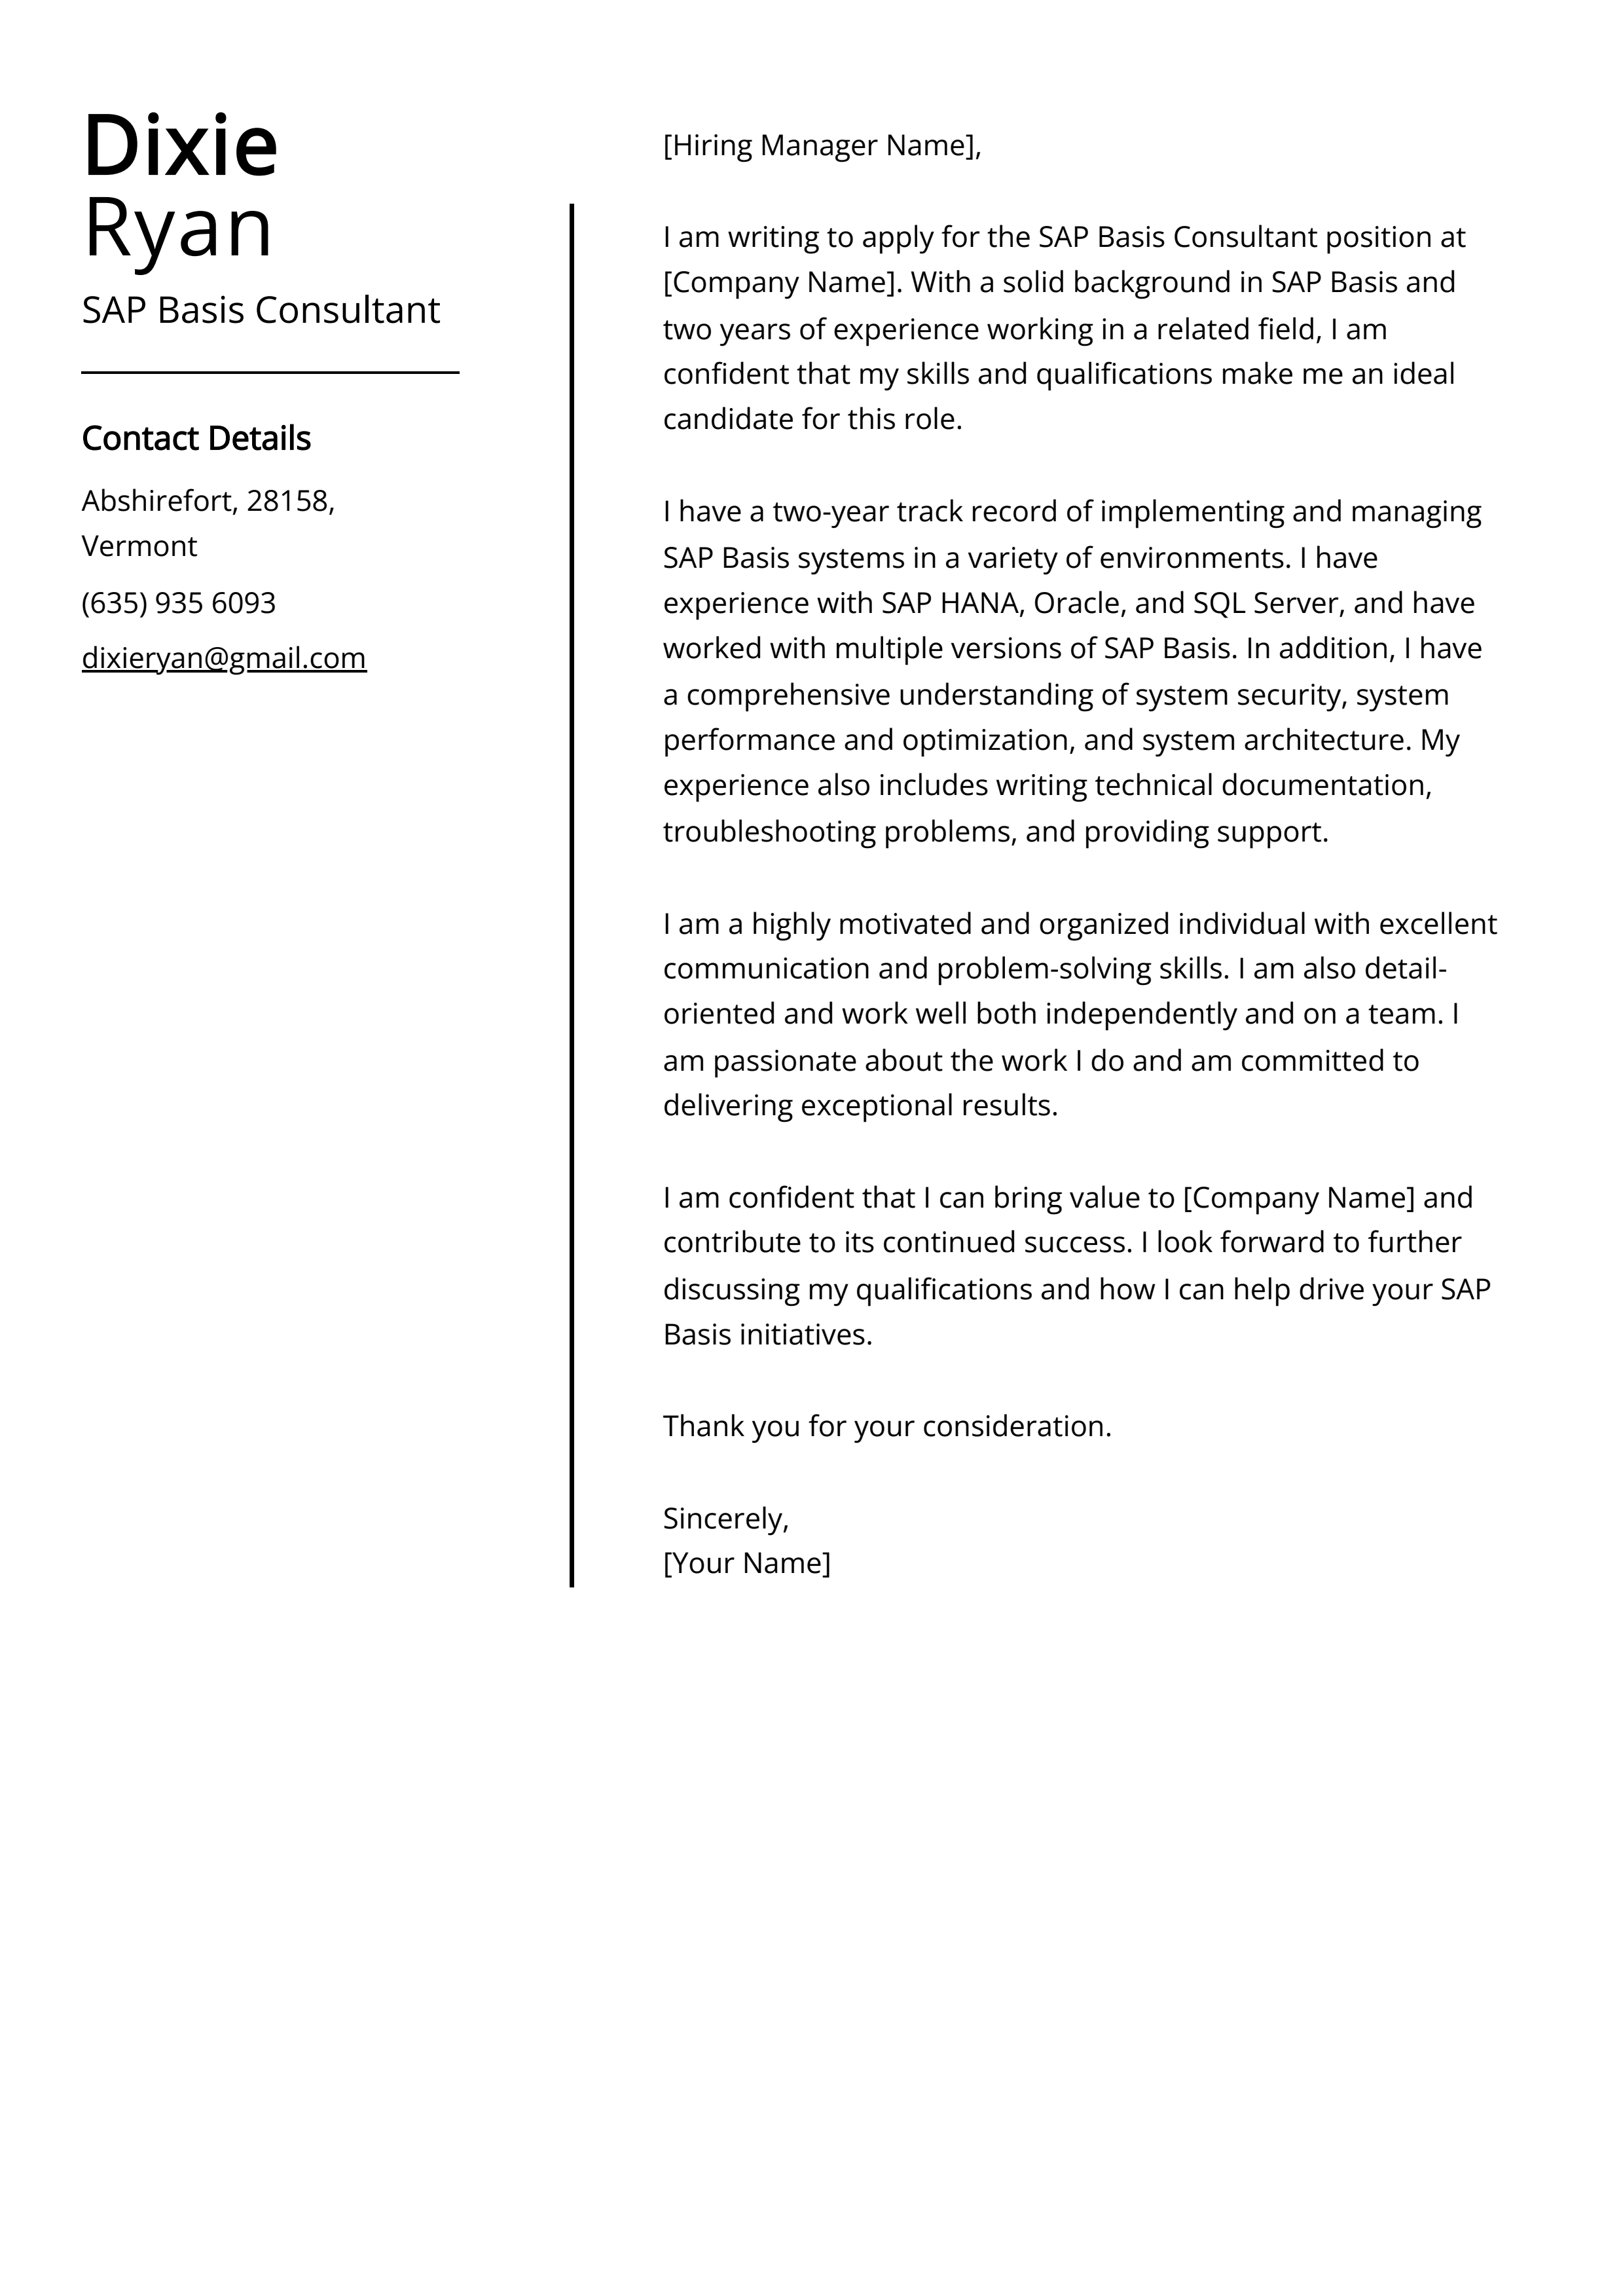 SAP Basis Consultant Cover Letter Example